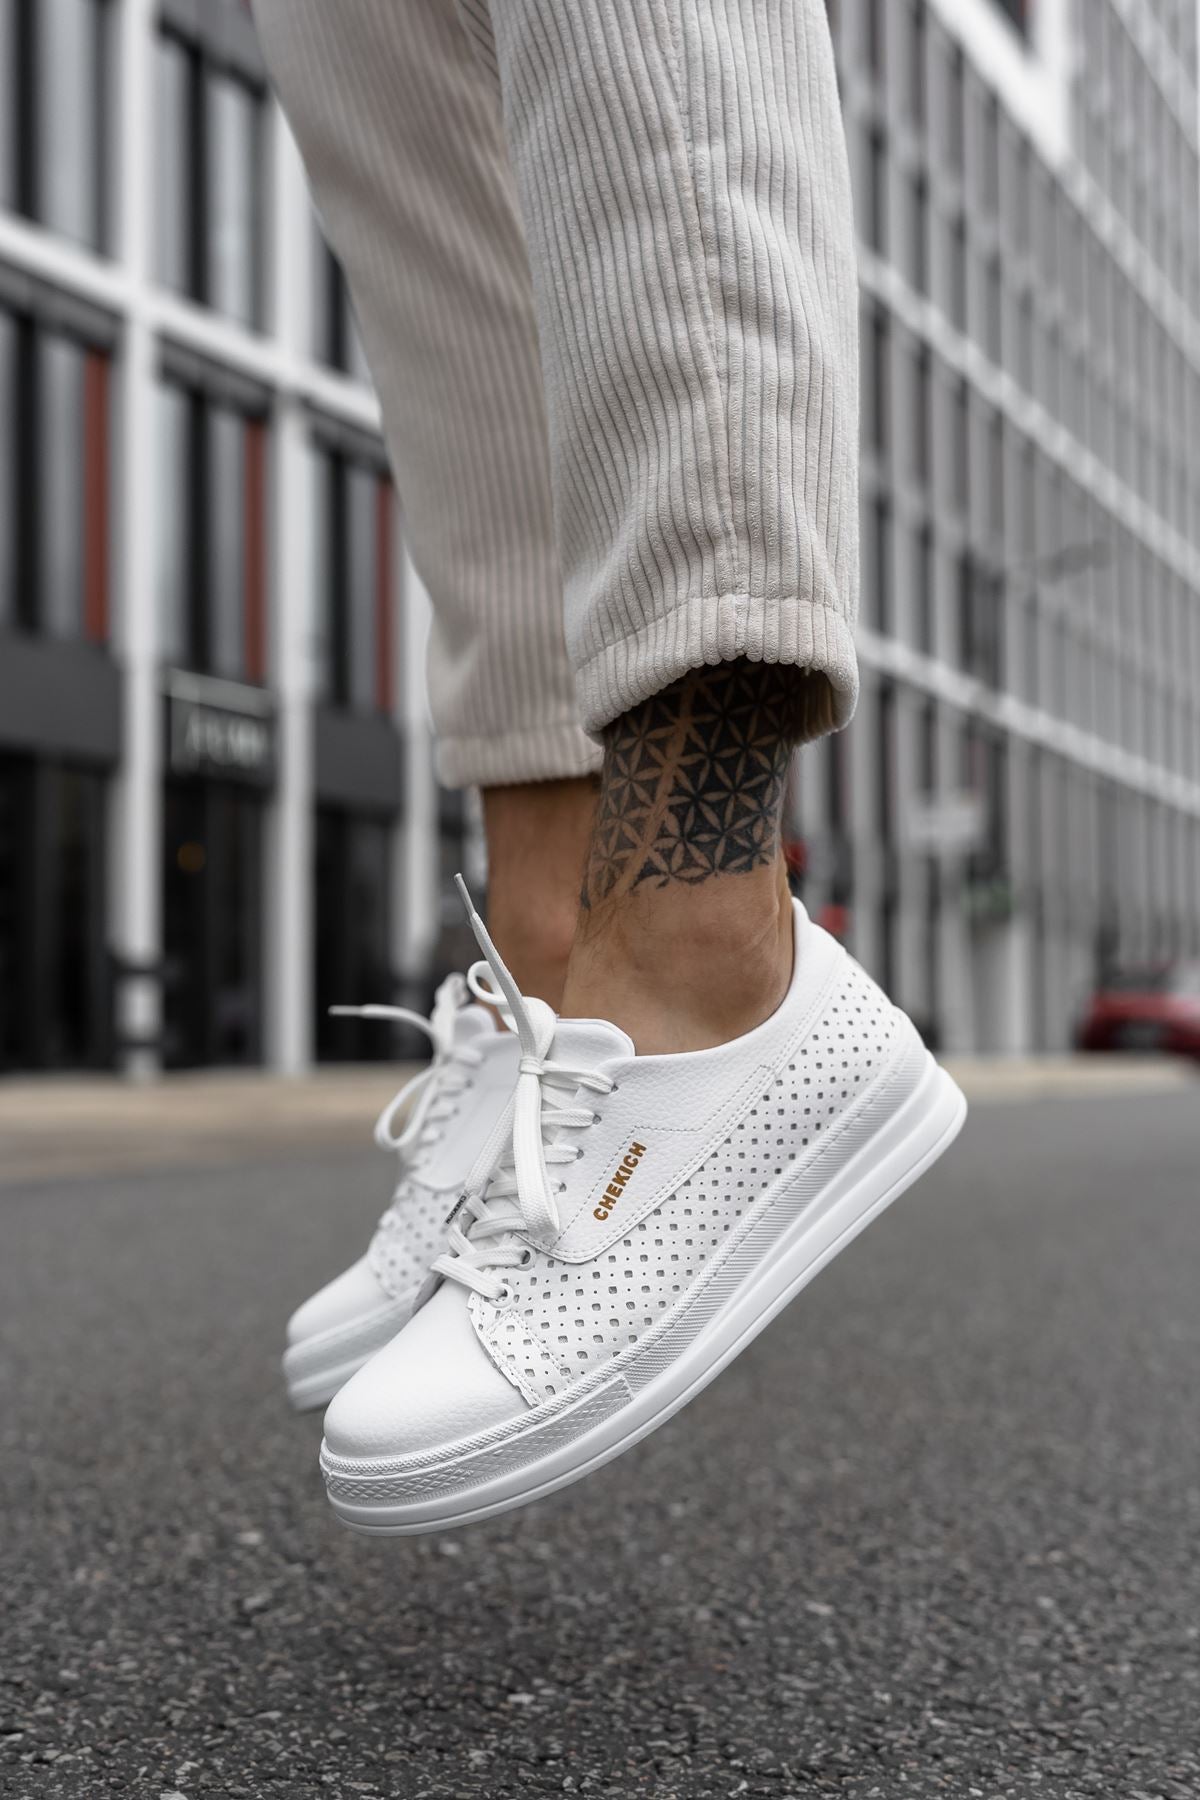 CH043 Men's Unisex Full White Casual Shoes - STREETMODE ™